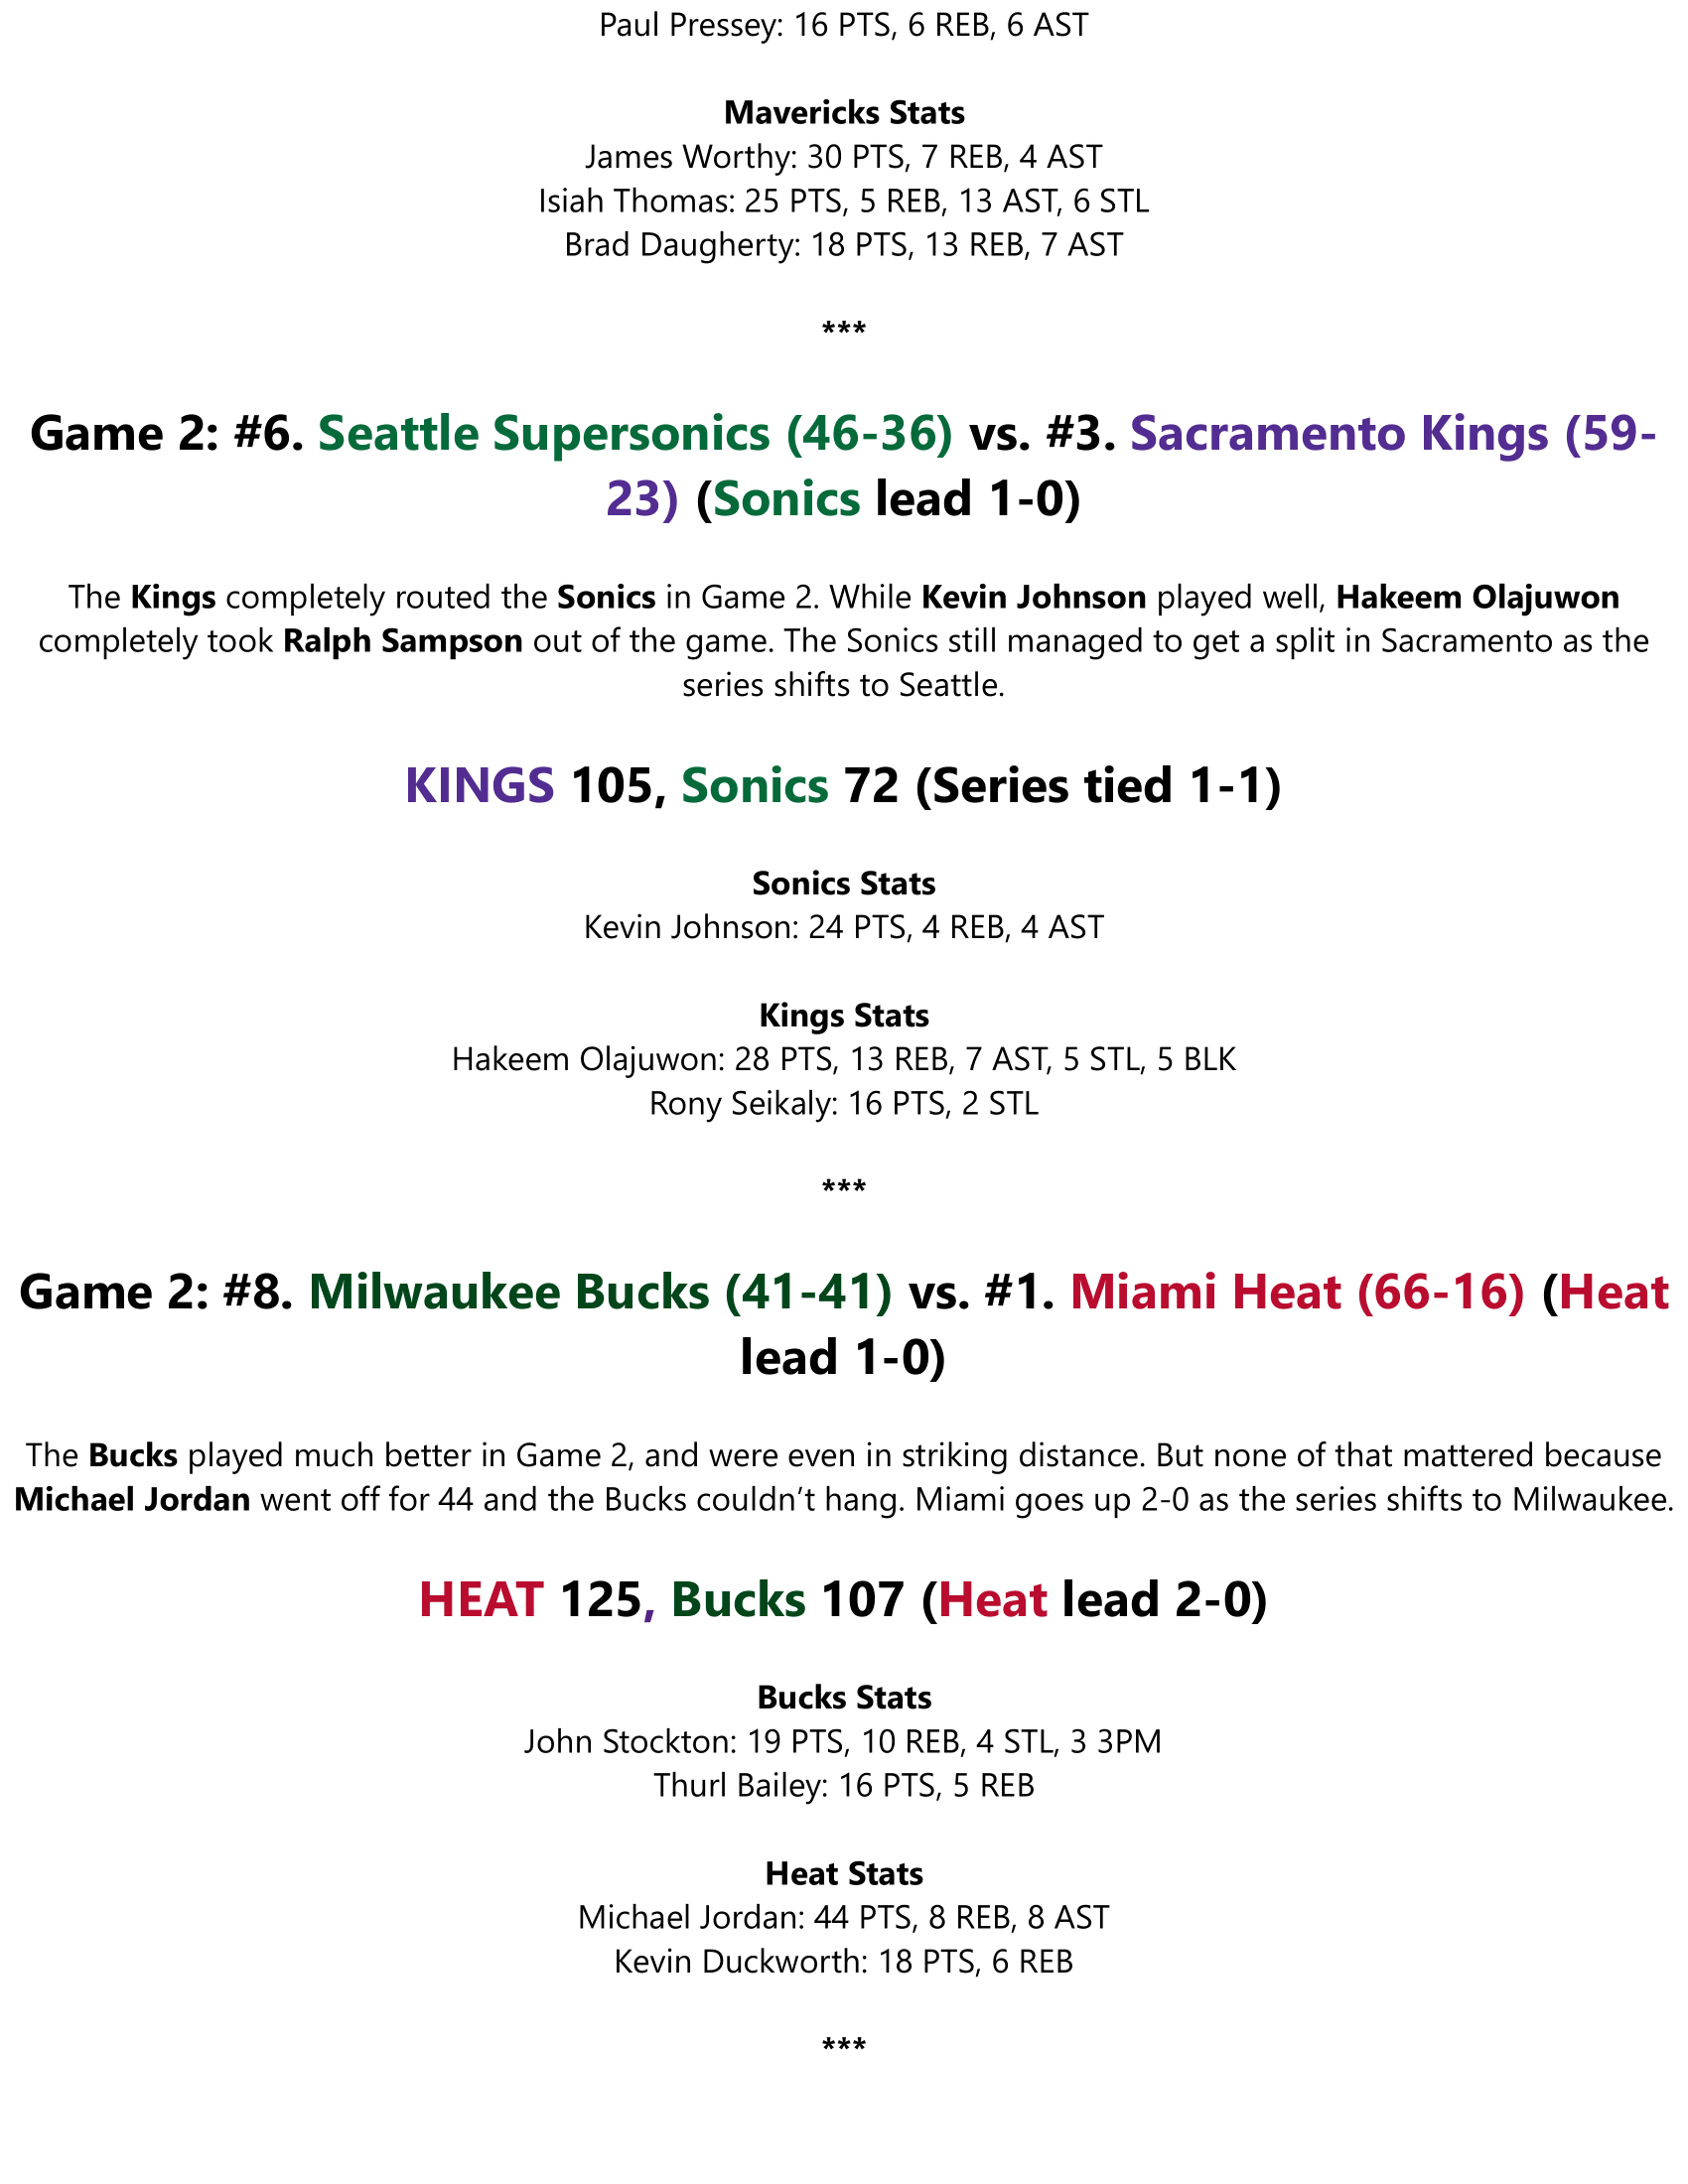 89-90-Part-5-Round-1-Semi-Preview-07.png